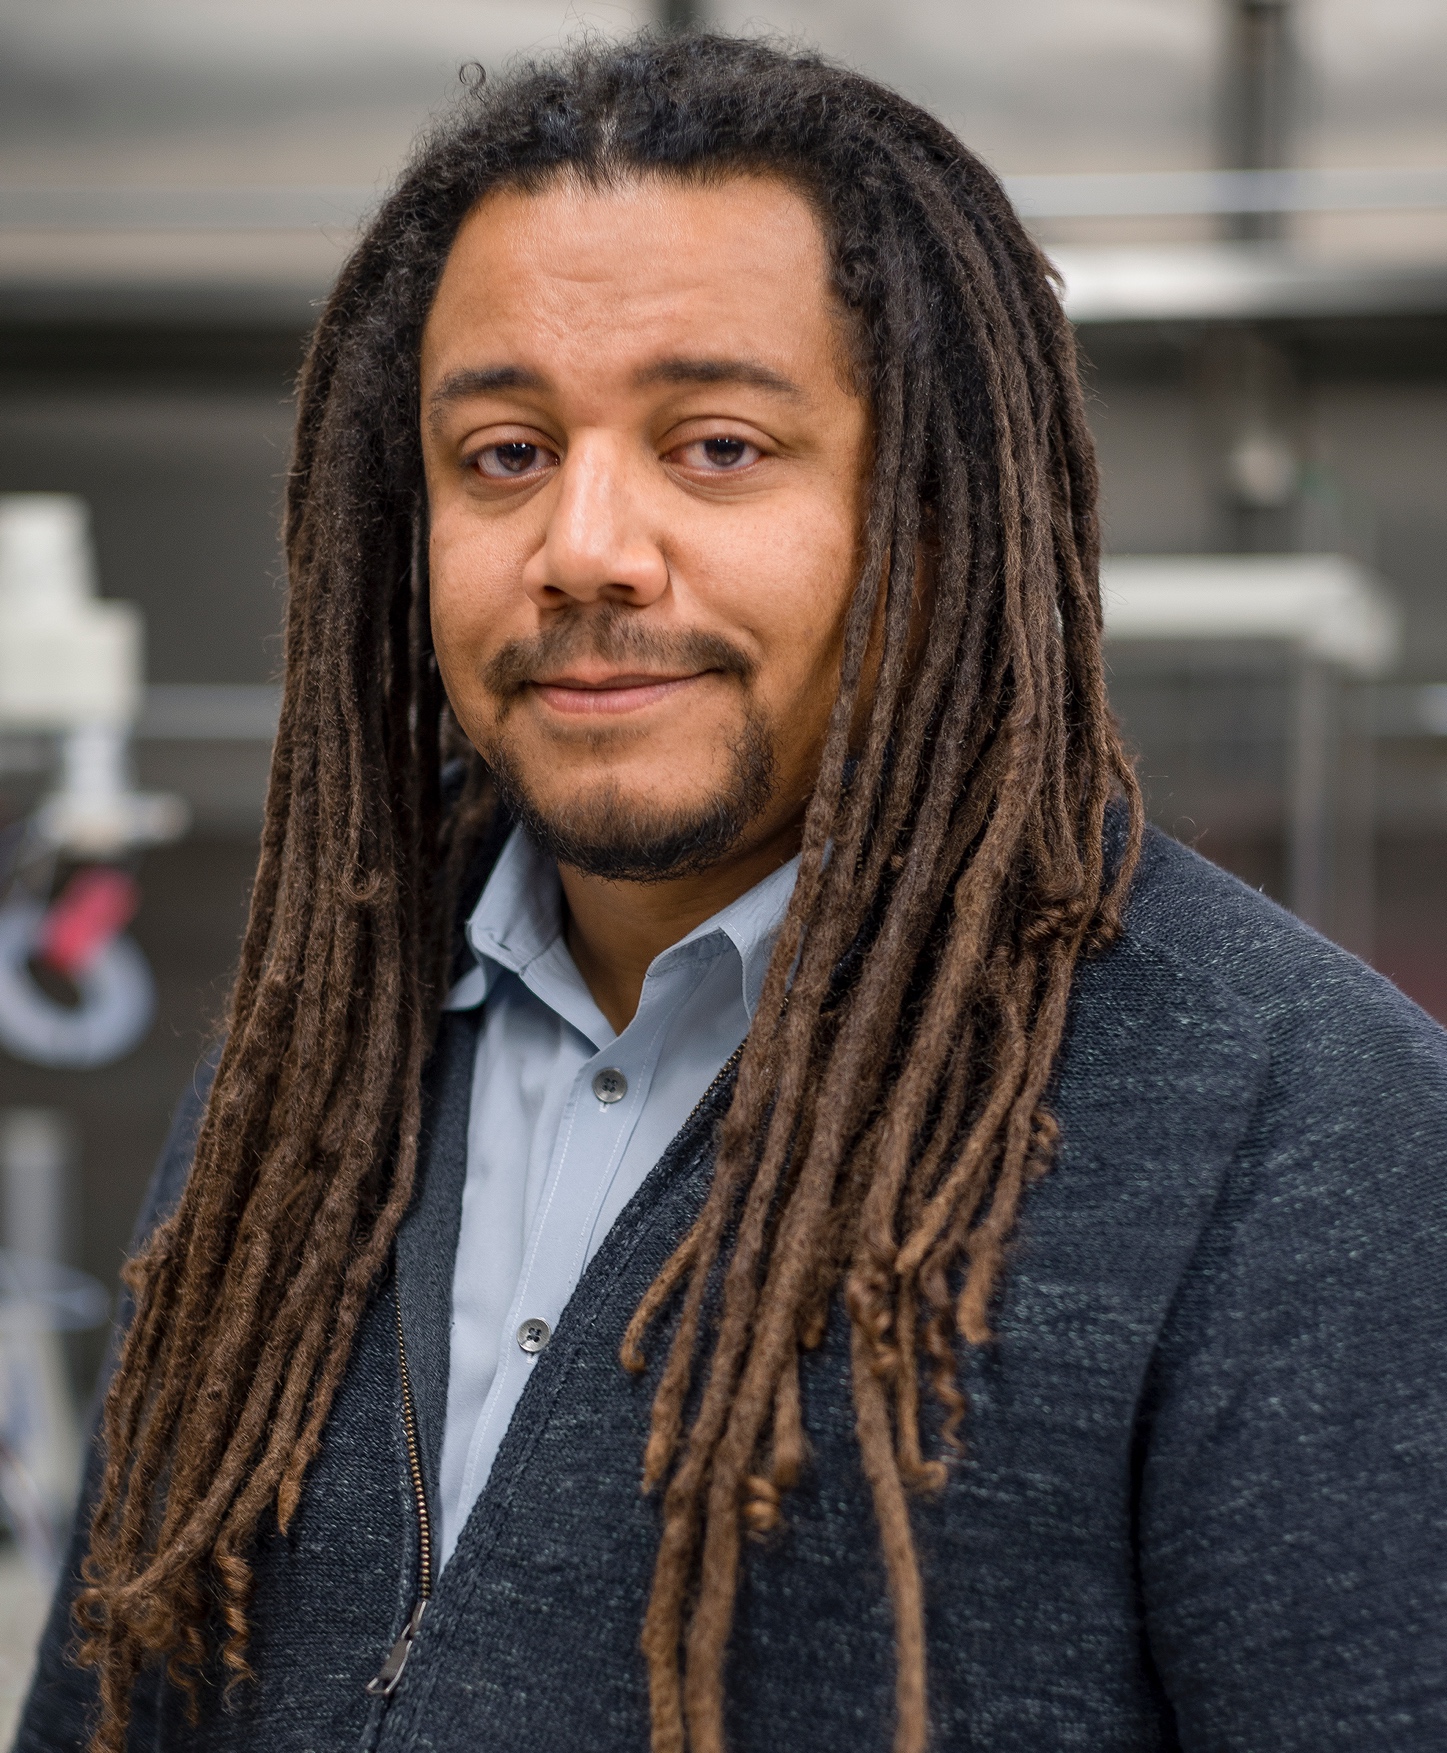 Biochemistry Alumnus, Bil Clemons, elected to the National Academy of Sciences